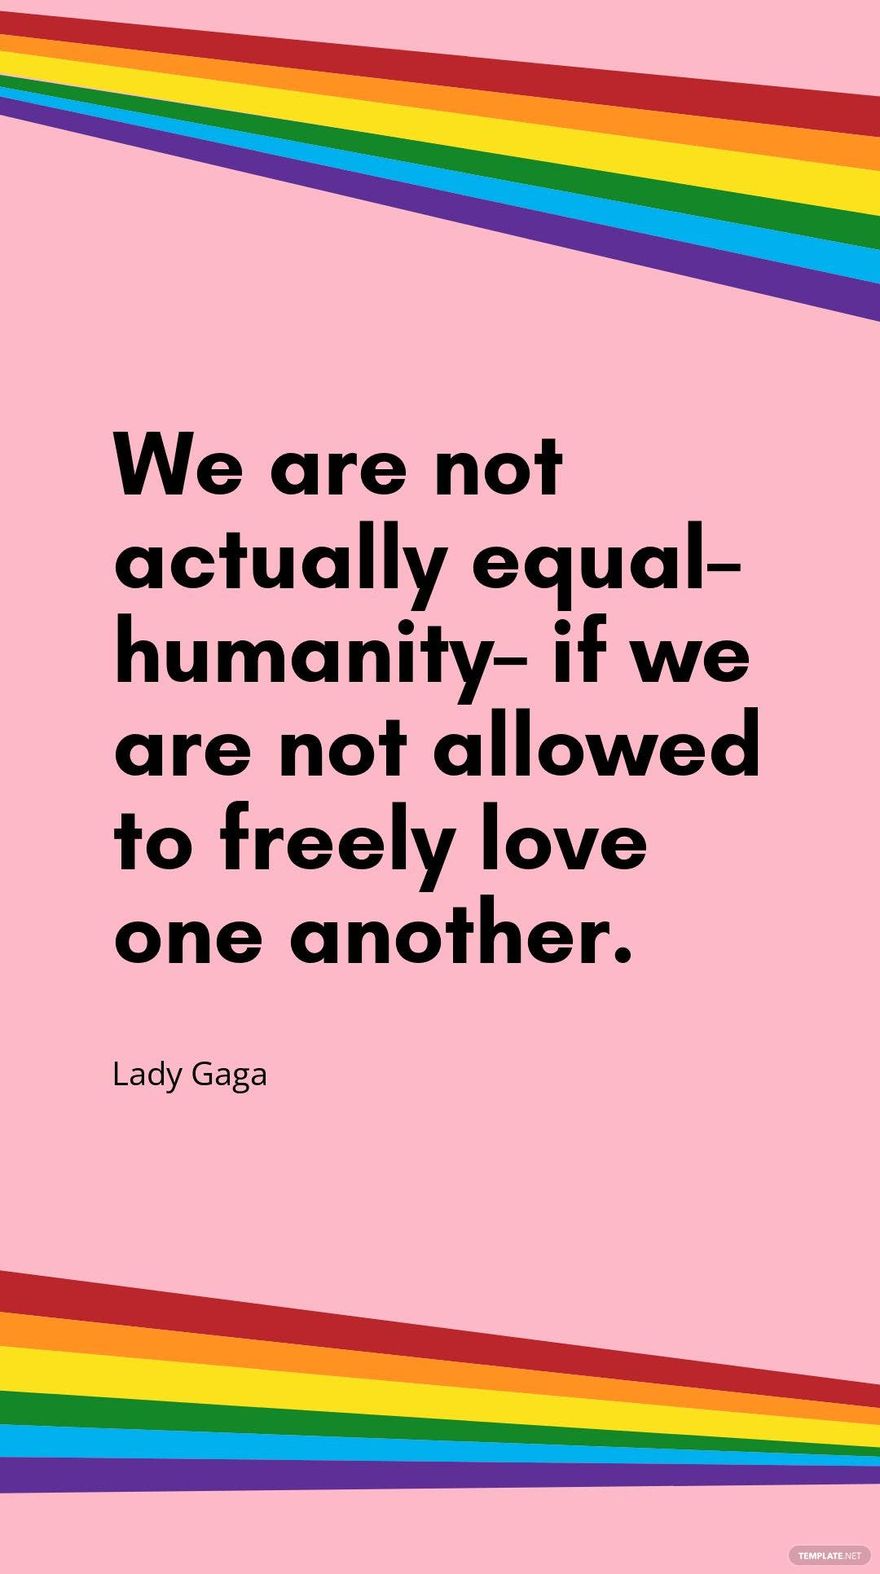 Lady Gaga - We are not actually equal – humanity – if we are not allowed to freely love one another.